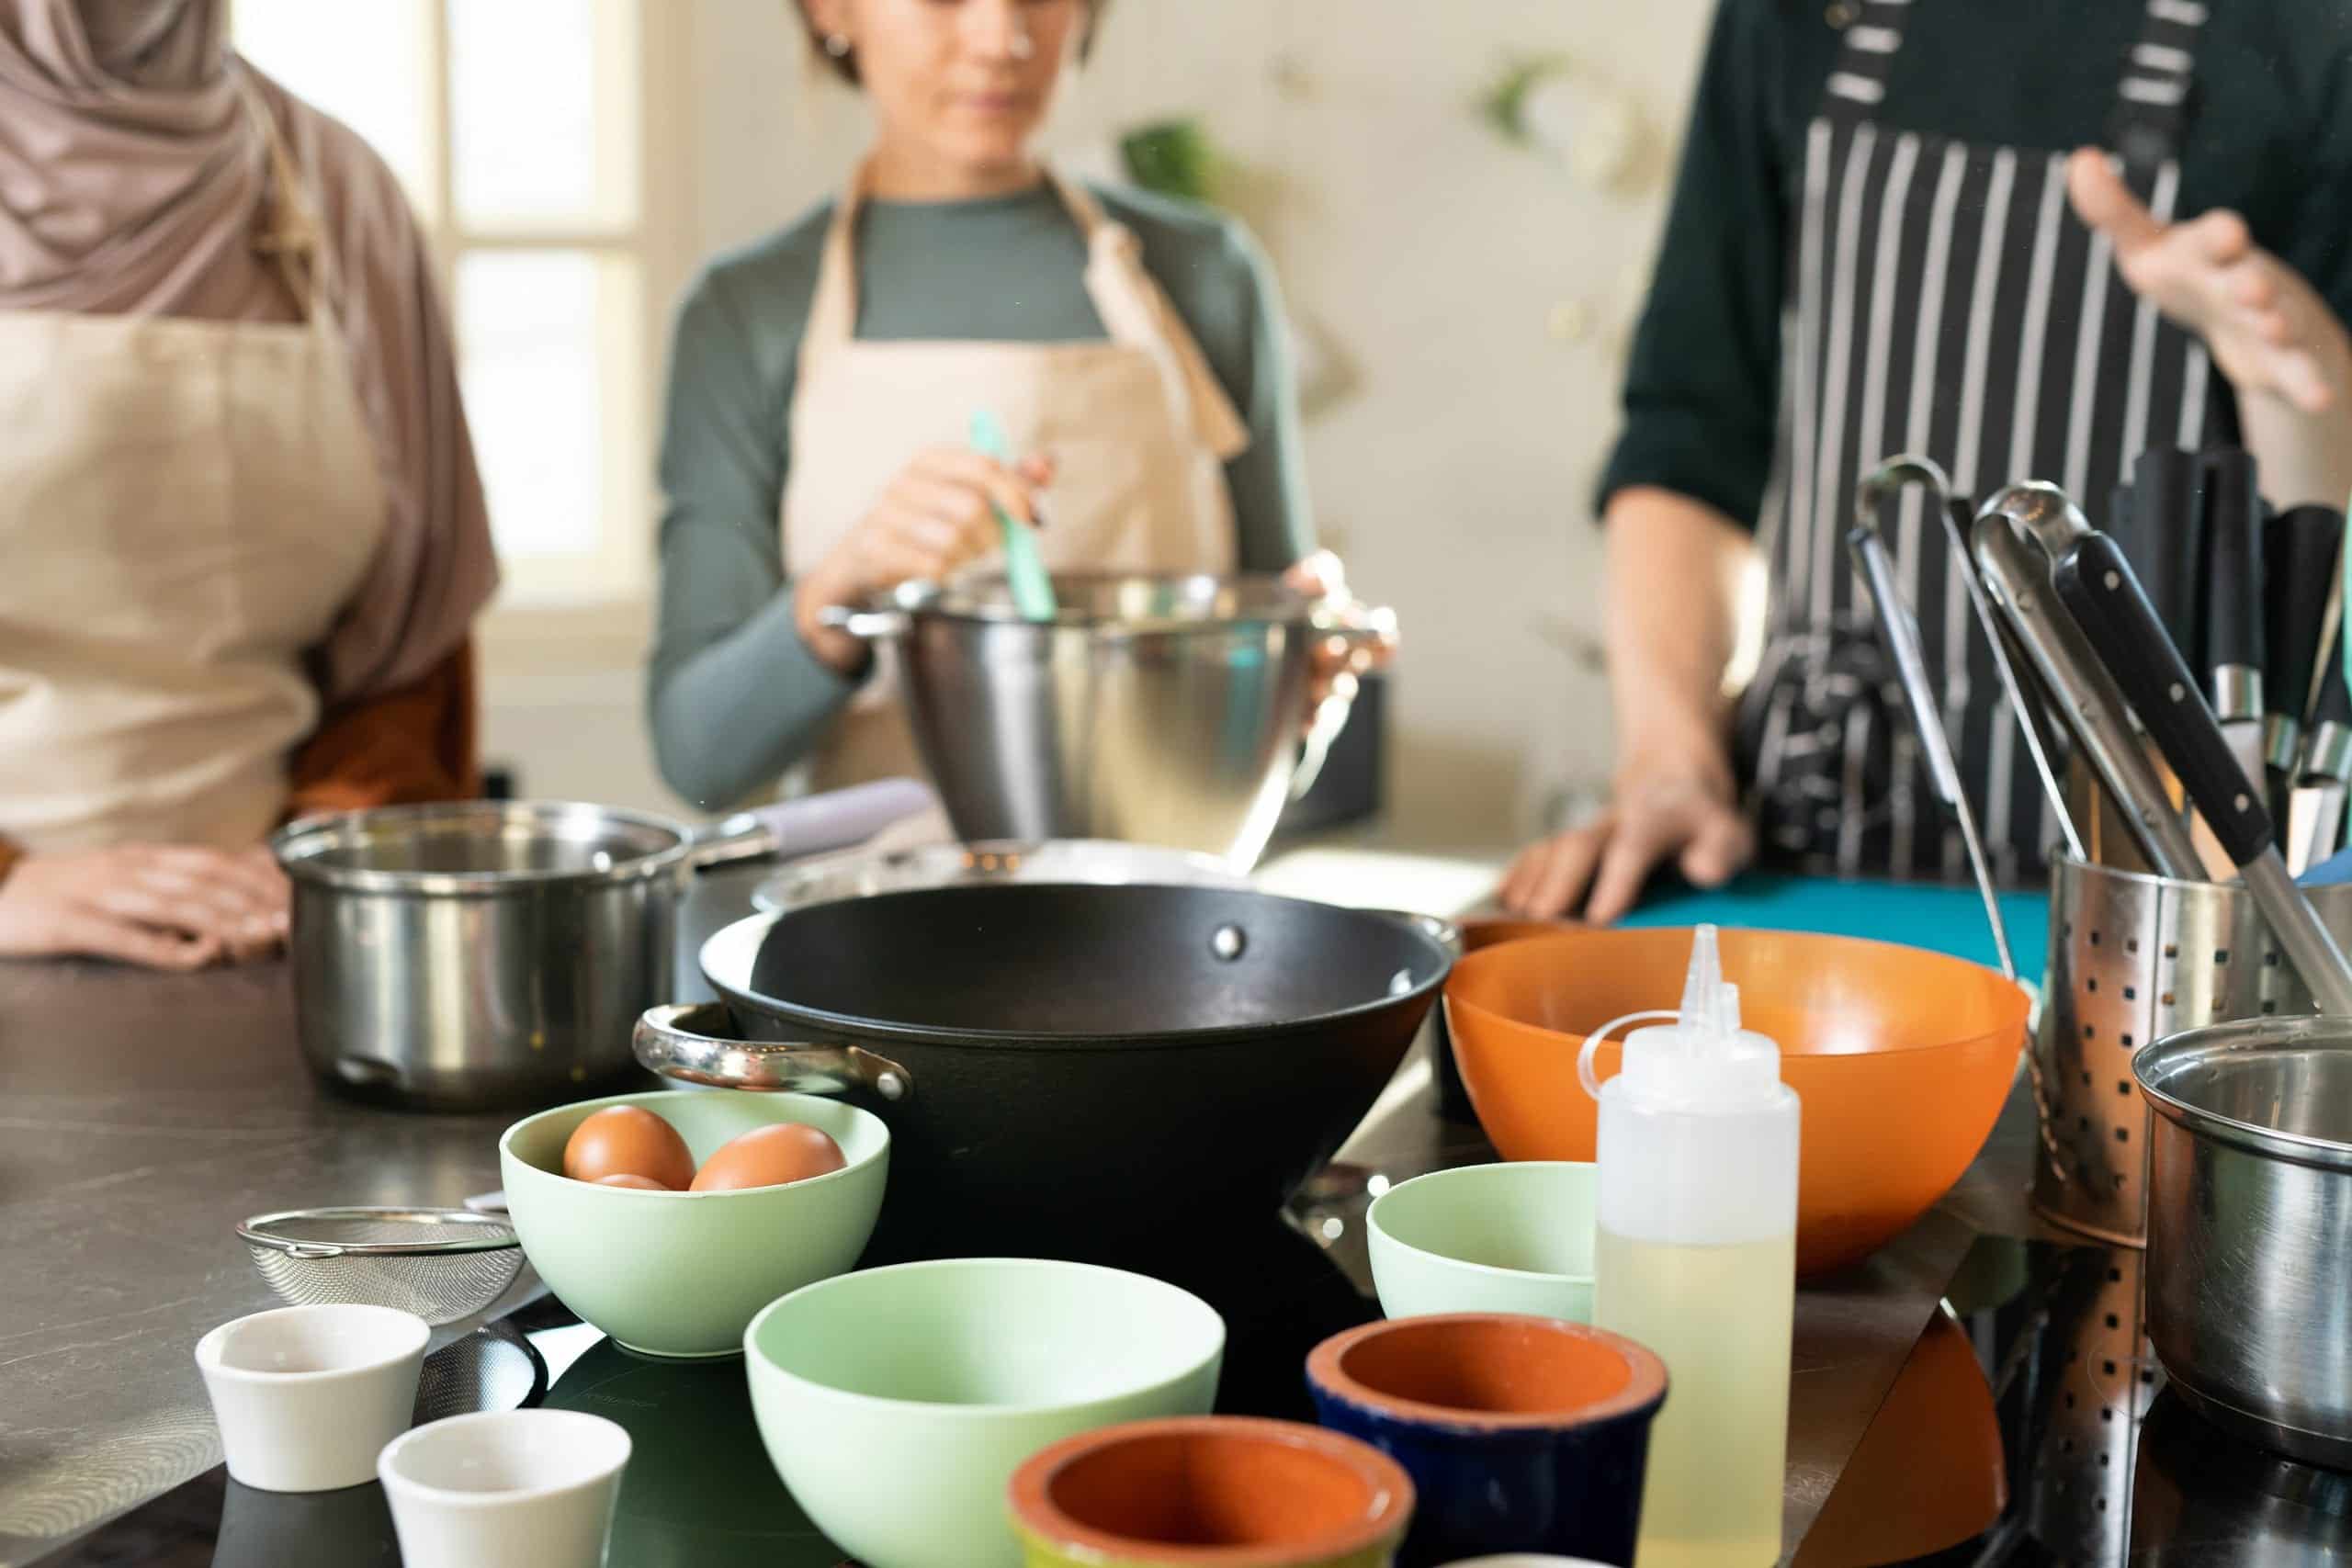 How Cooking Can Be Easy to Learn For Adults With Autism